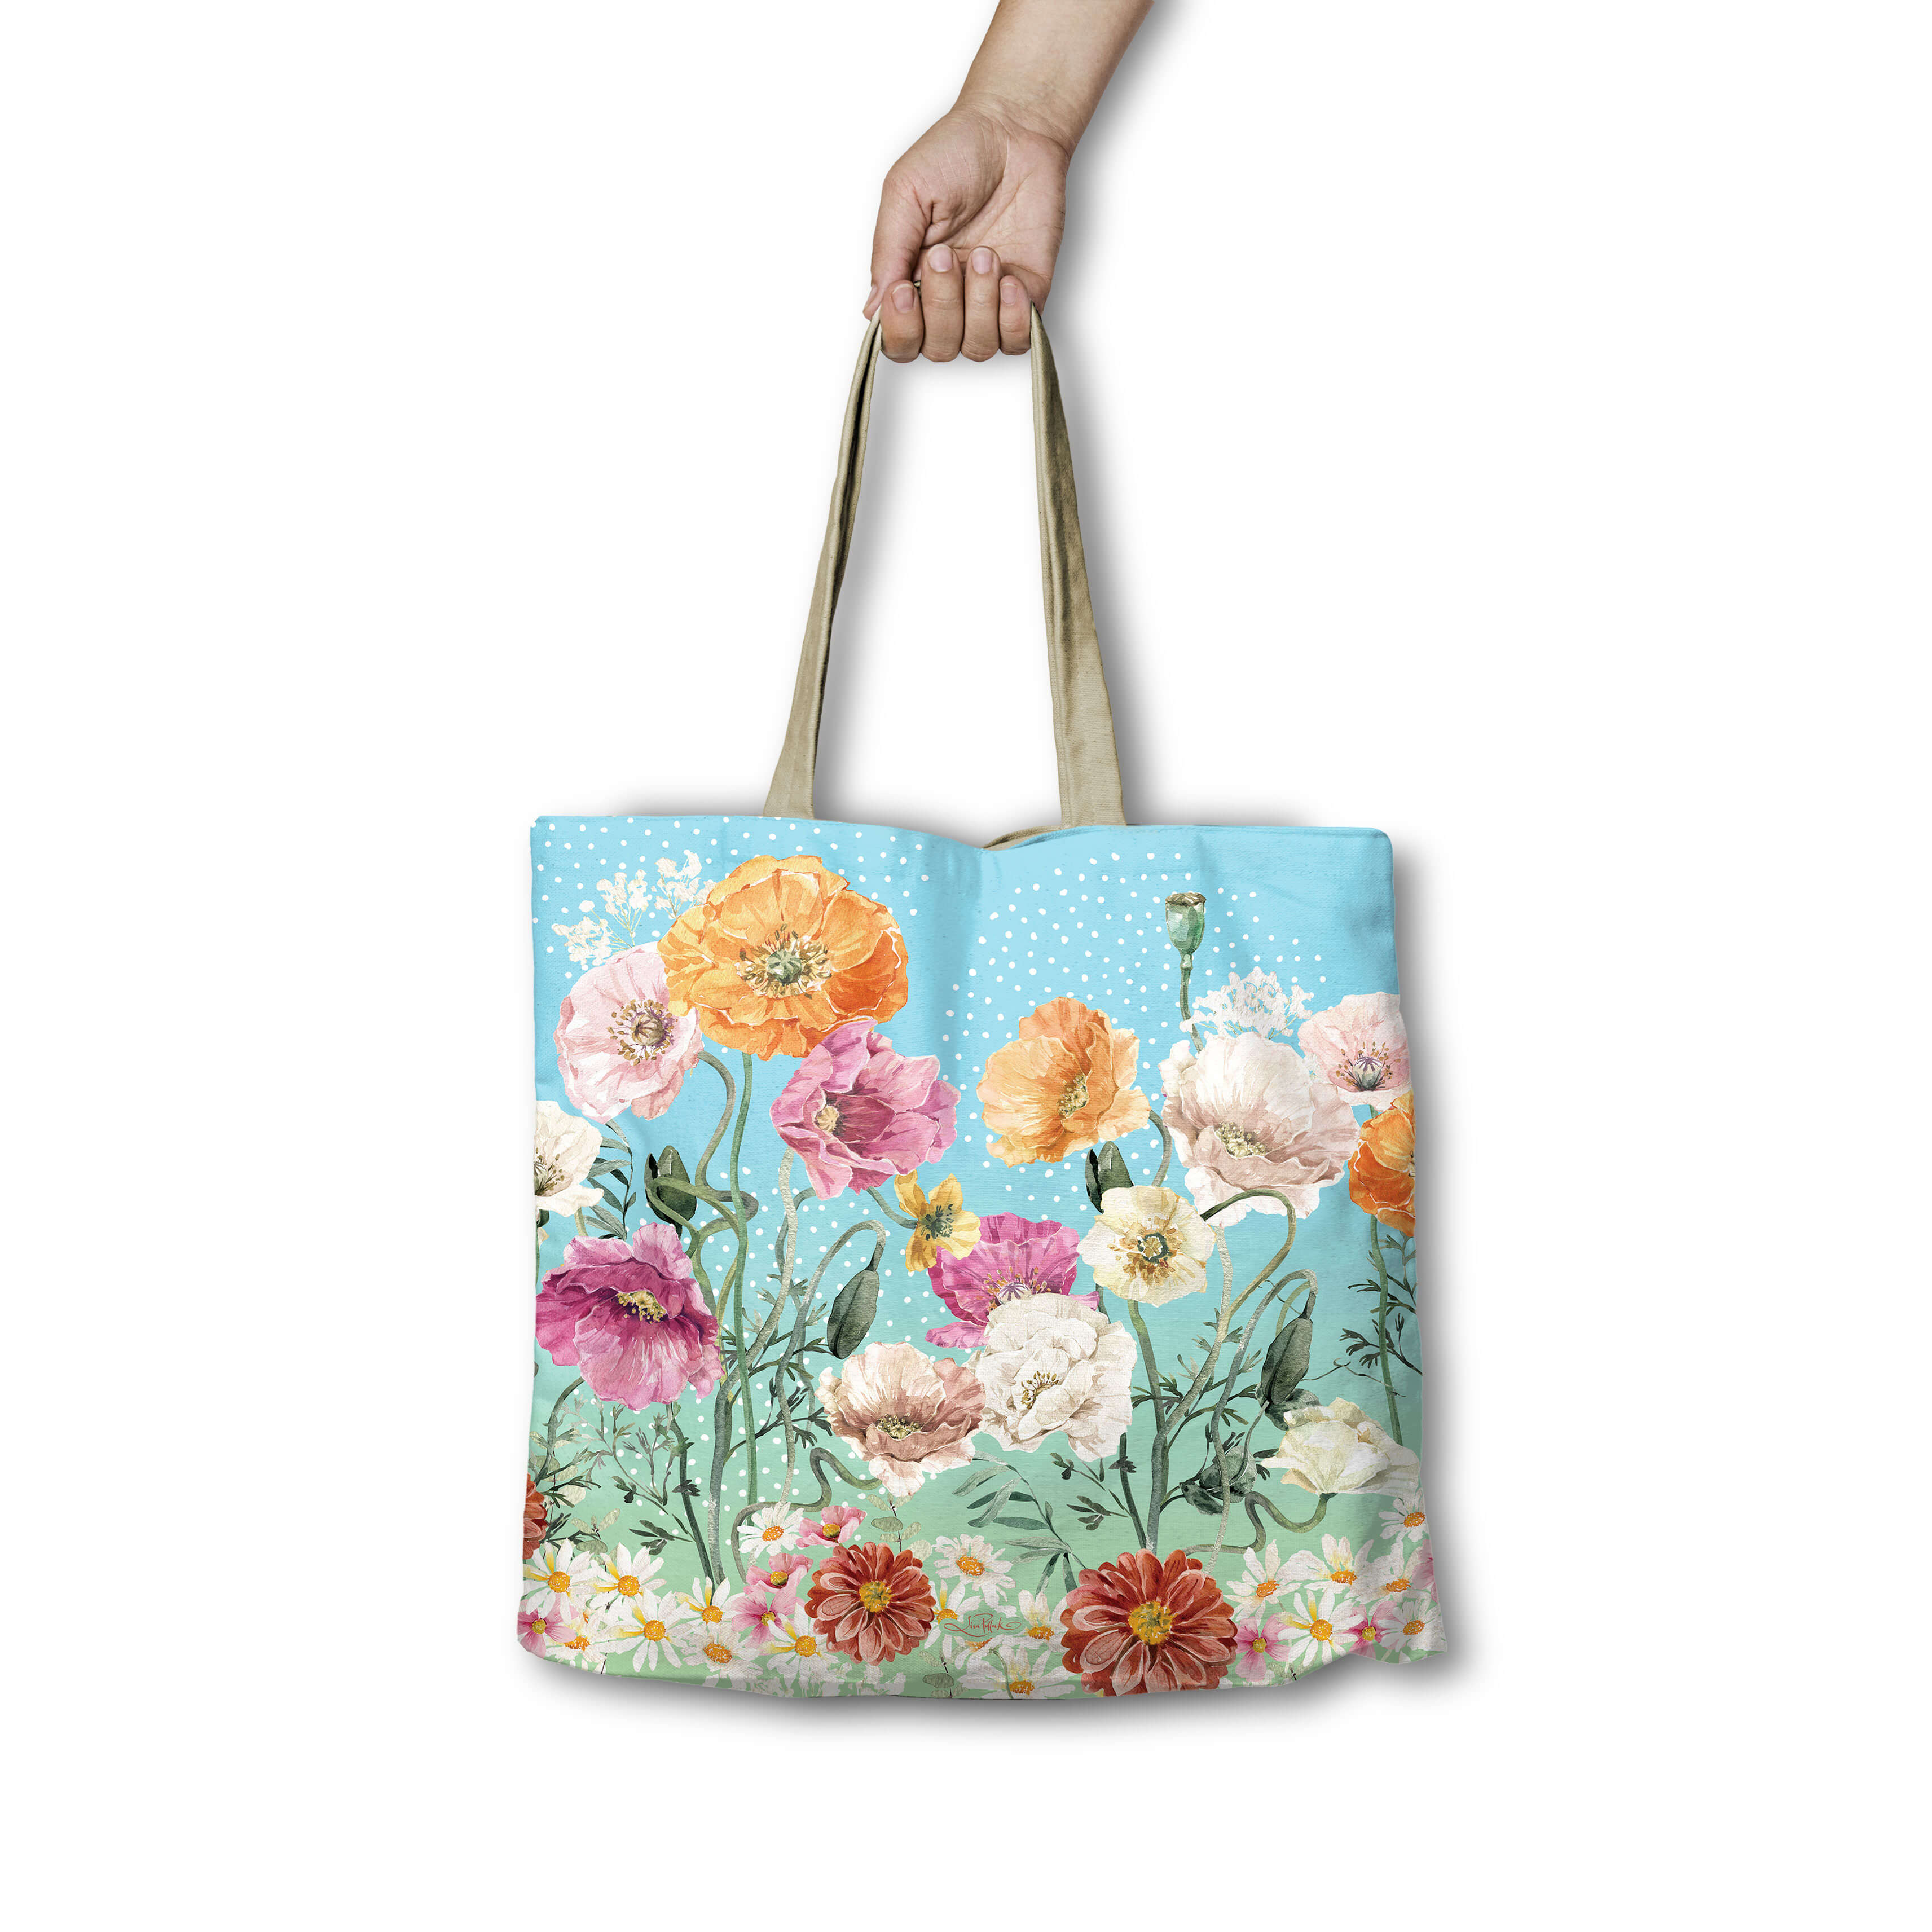 Shopping Tote - Summer Poppies